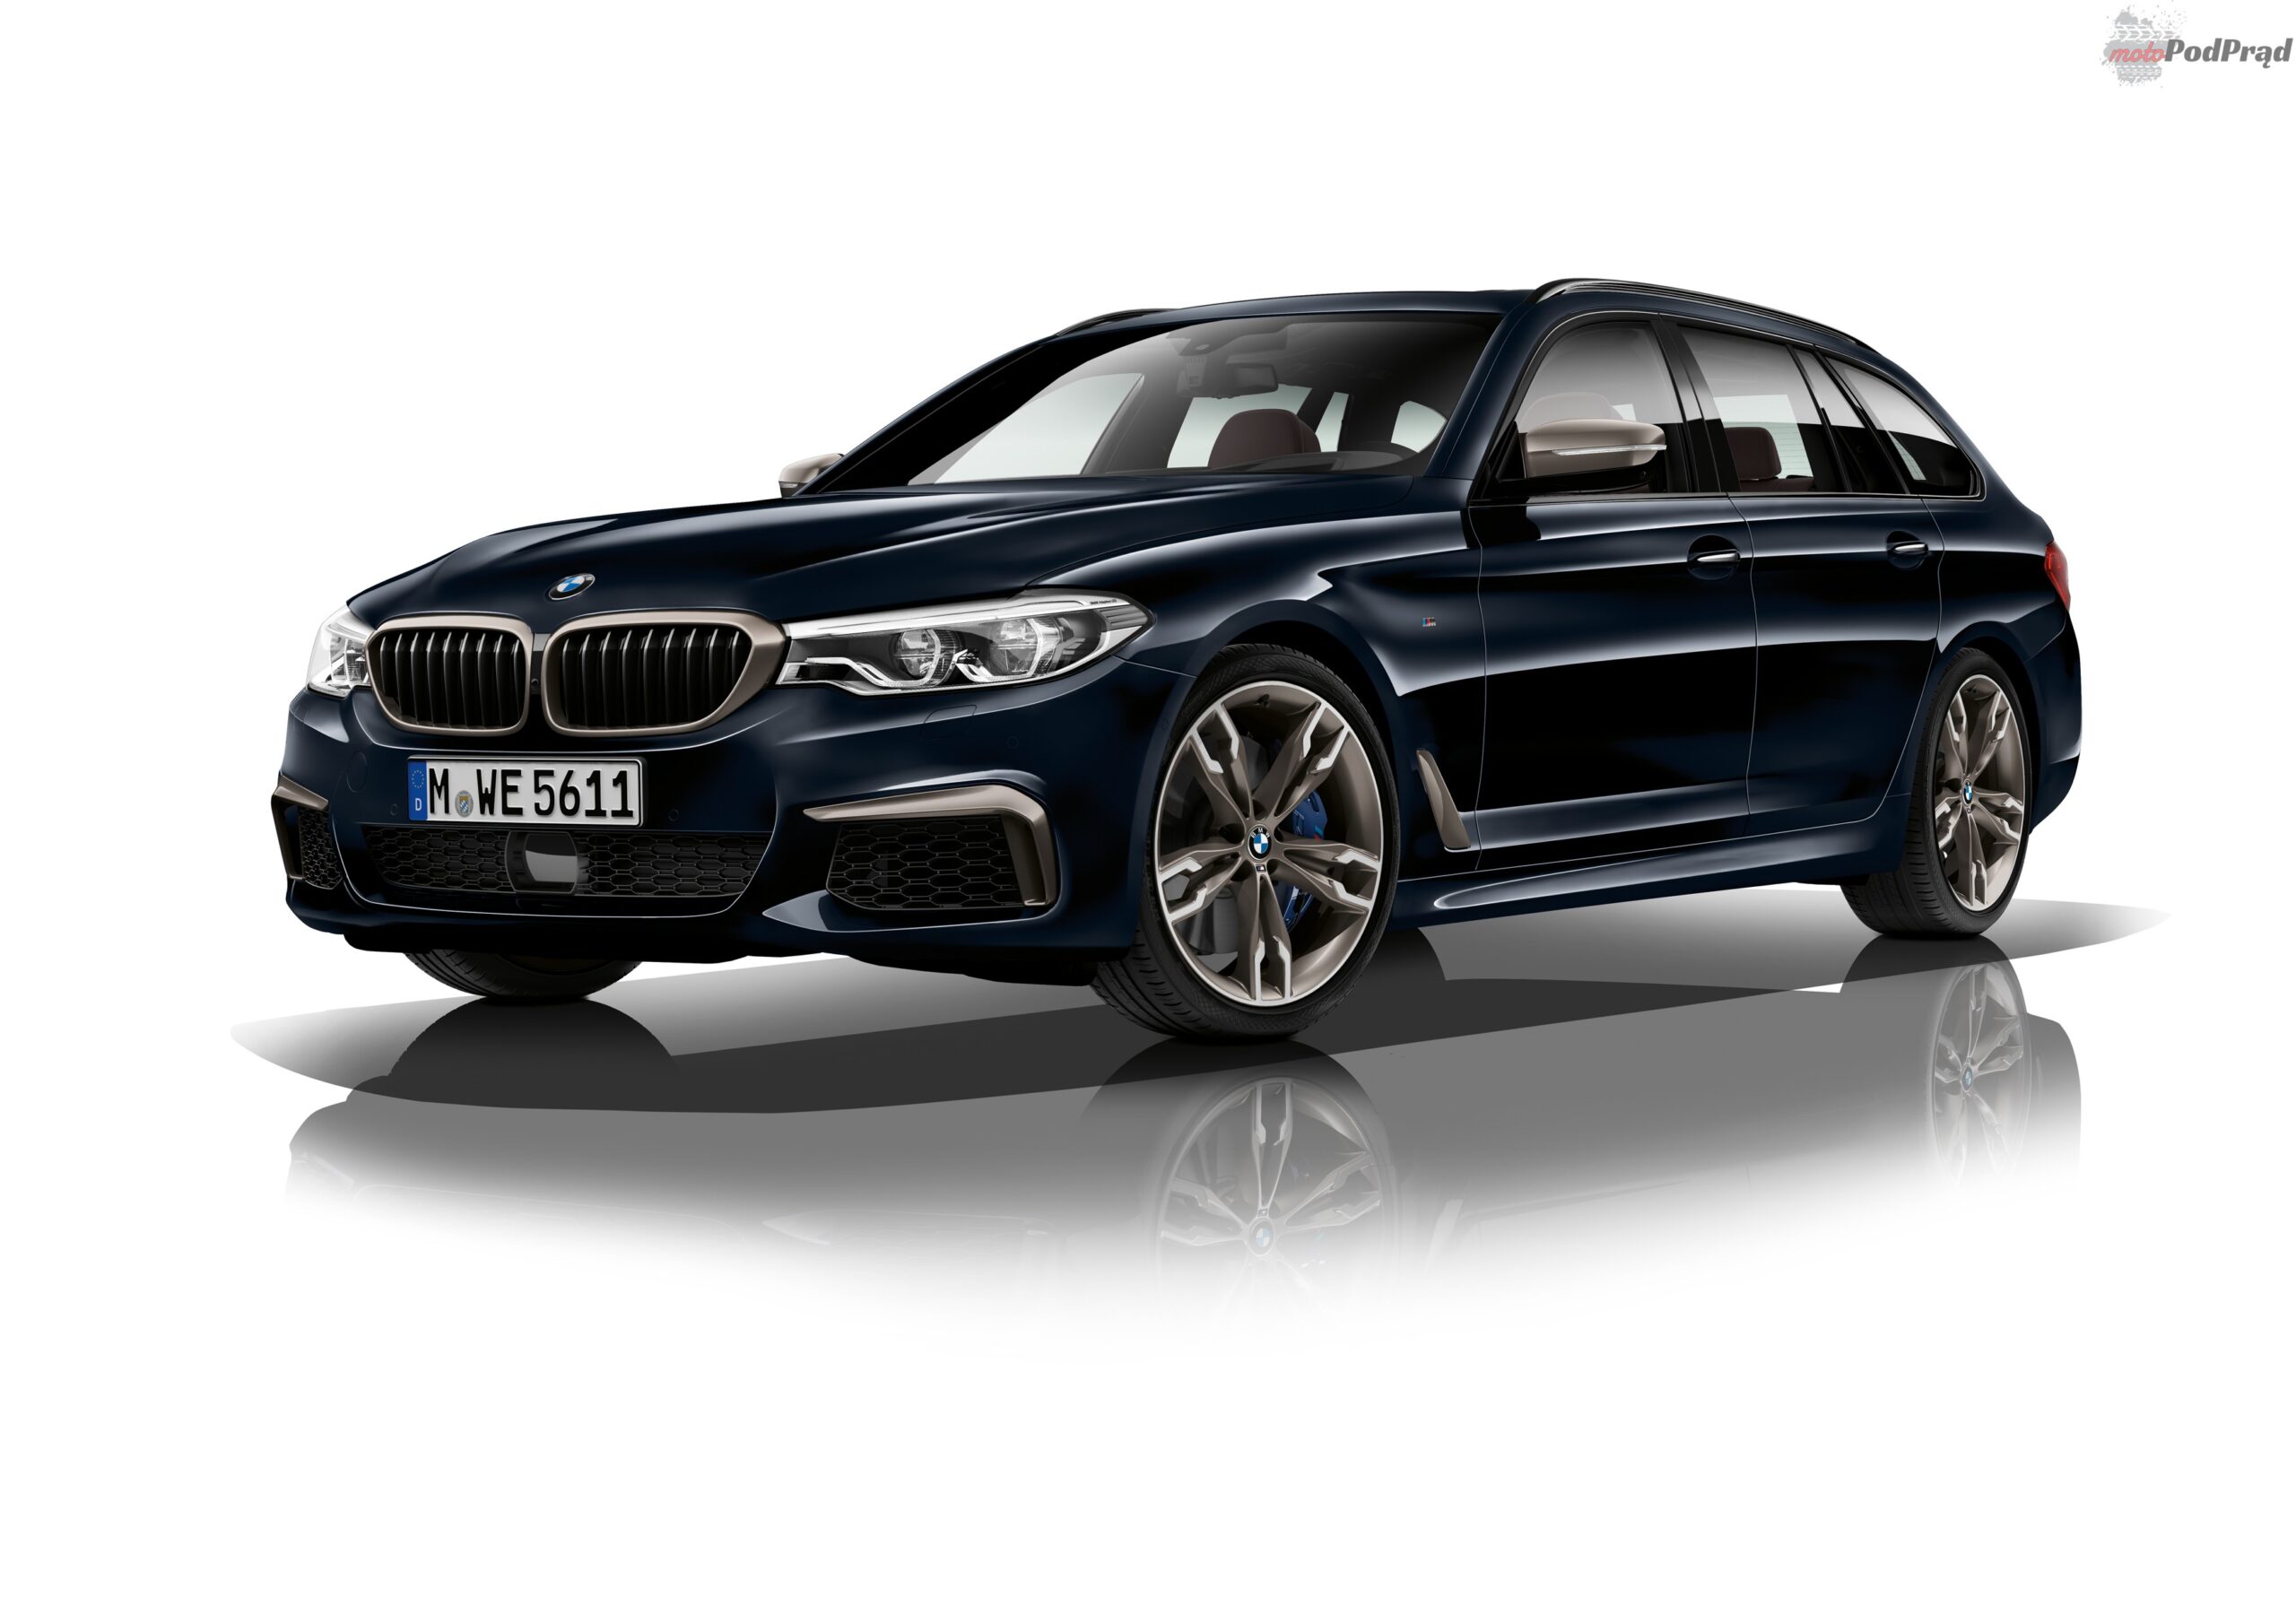 P90276097 highRes the bmw m550d xdrive scaled